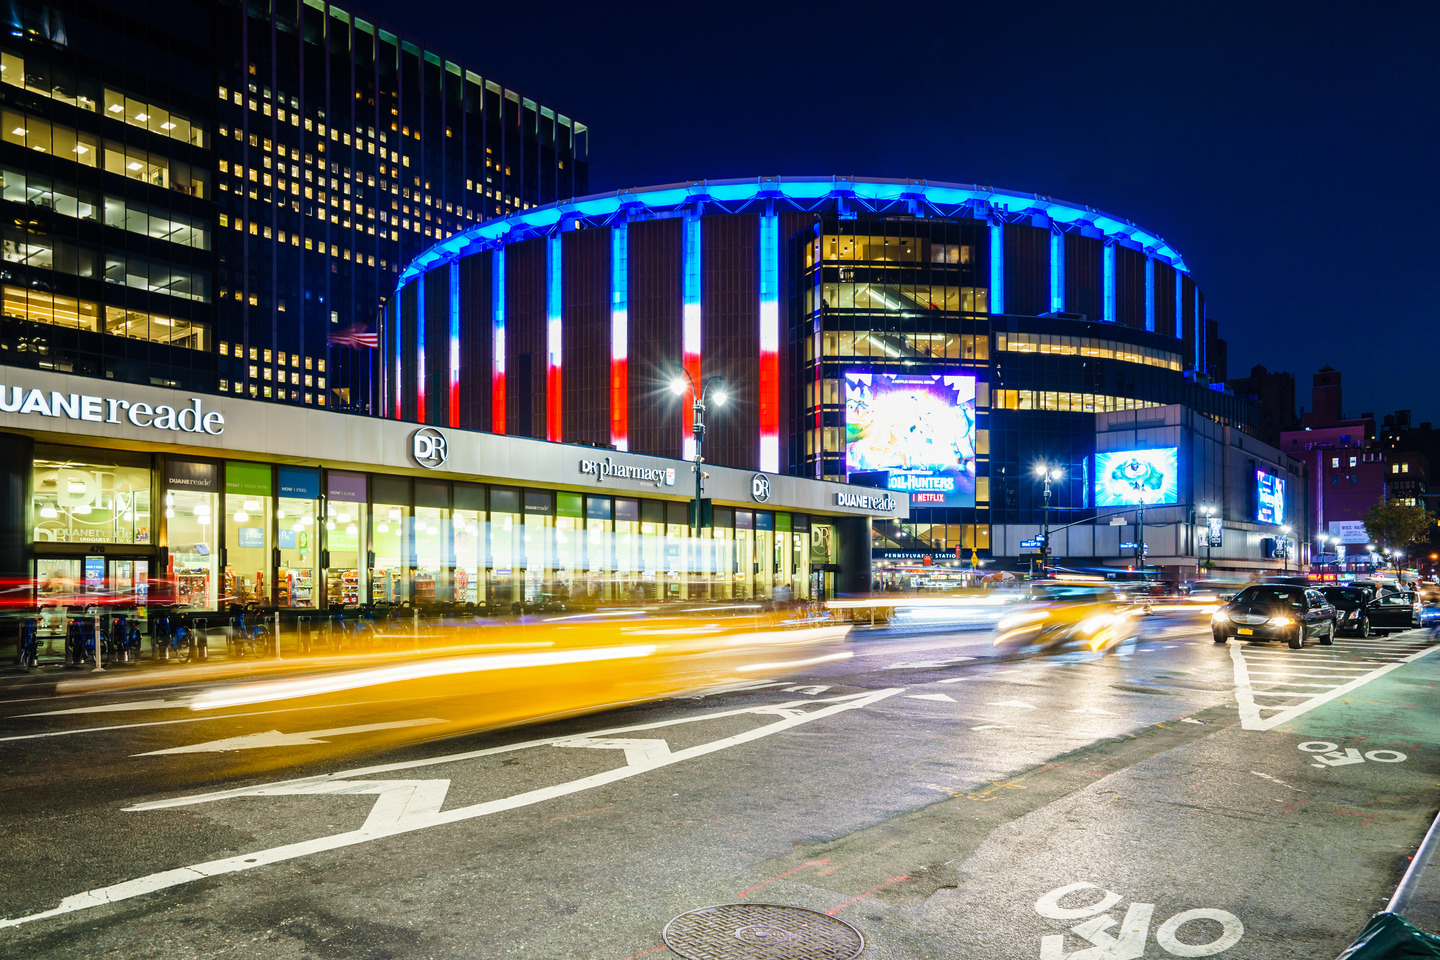 Facial recognition technology is causing drama at Madison Square Garden.